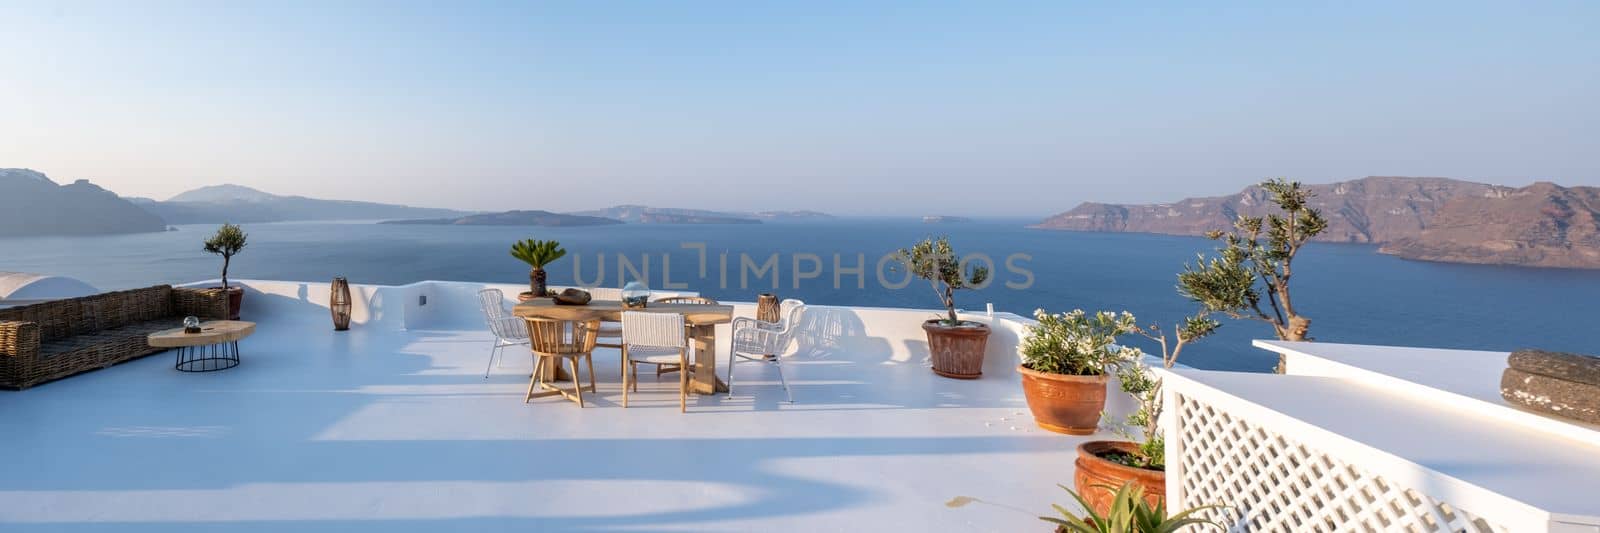 outside terrace of a restaurant by the ocean of Santorini Greece, chairs and tabel with flowers by the ocean by fokkebok